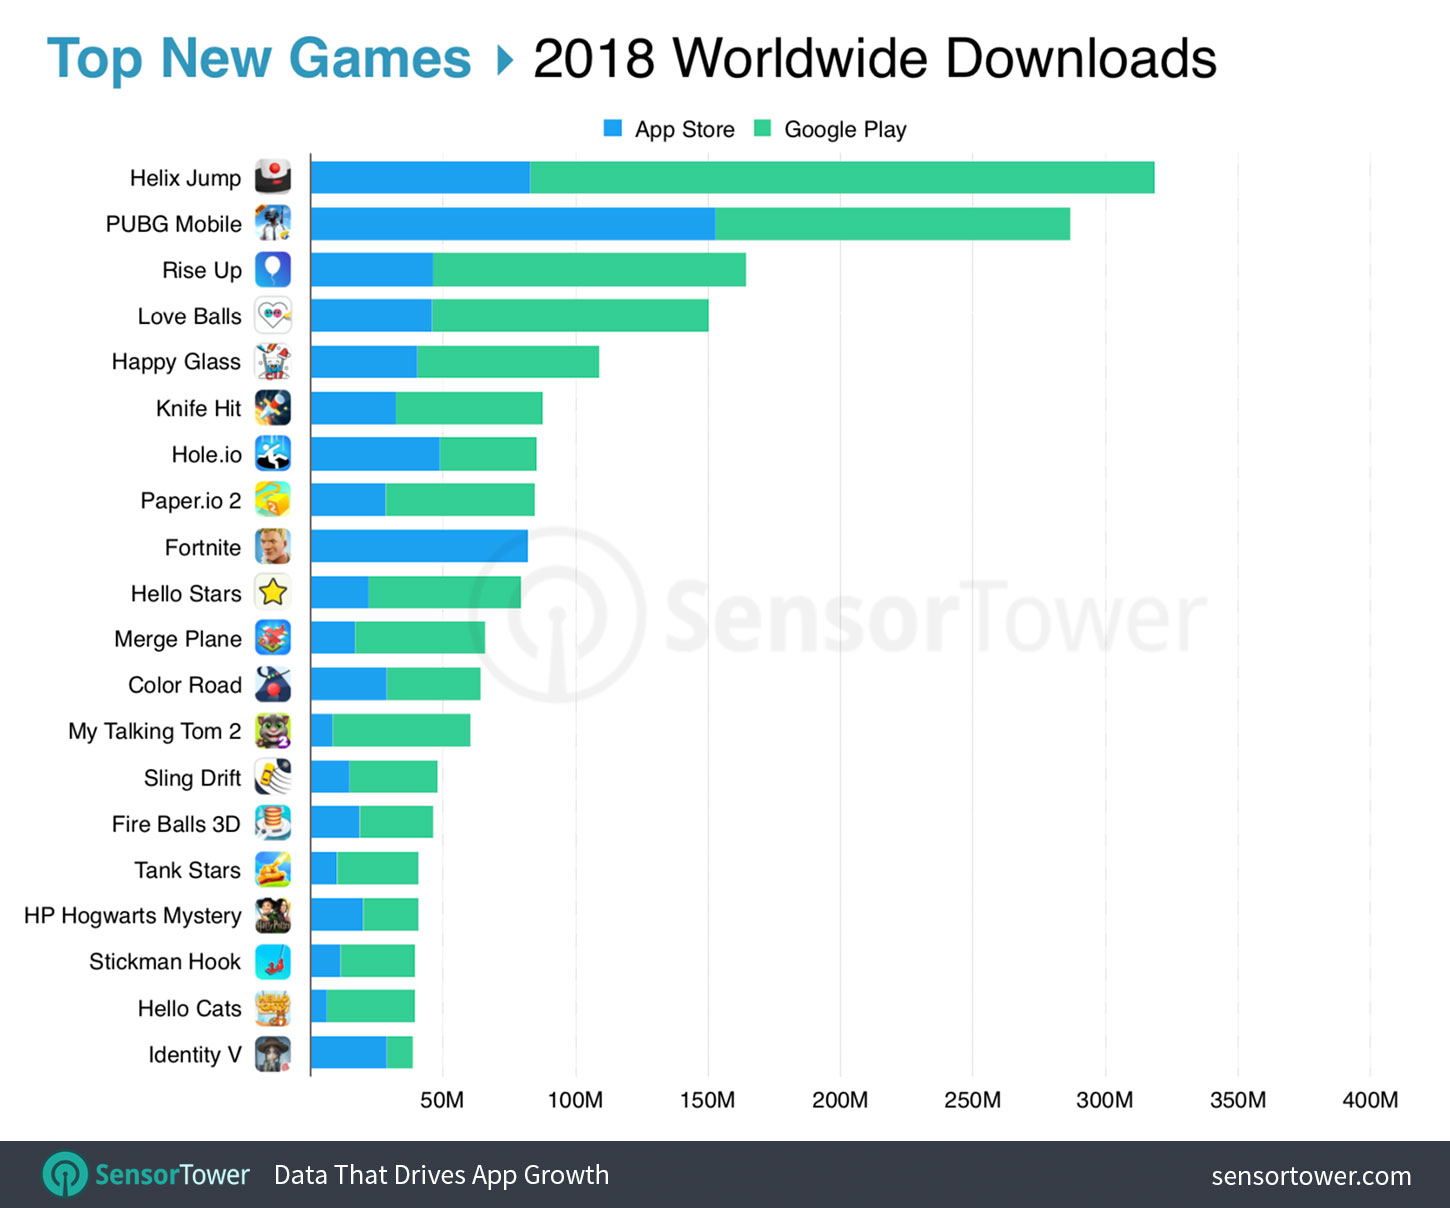 Top New Mobile Games Worldwide in 2018 by Downloads Chart